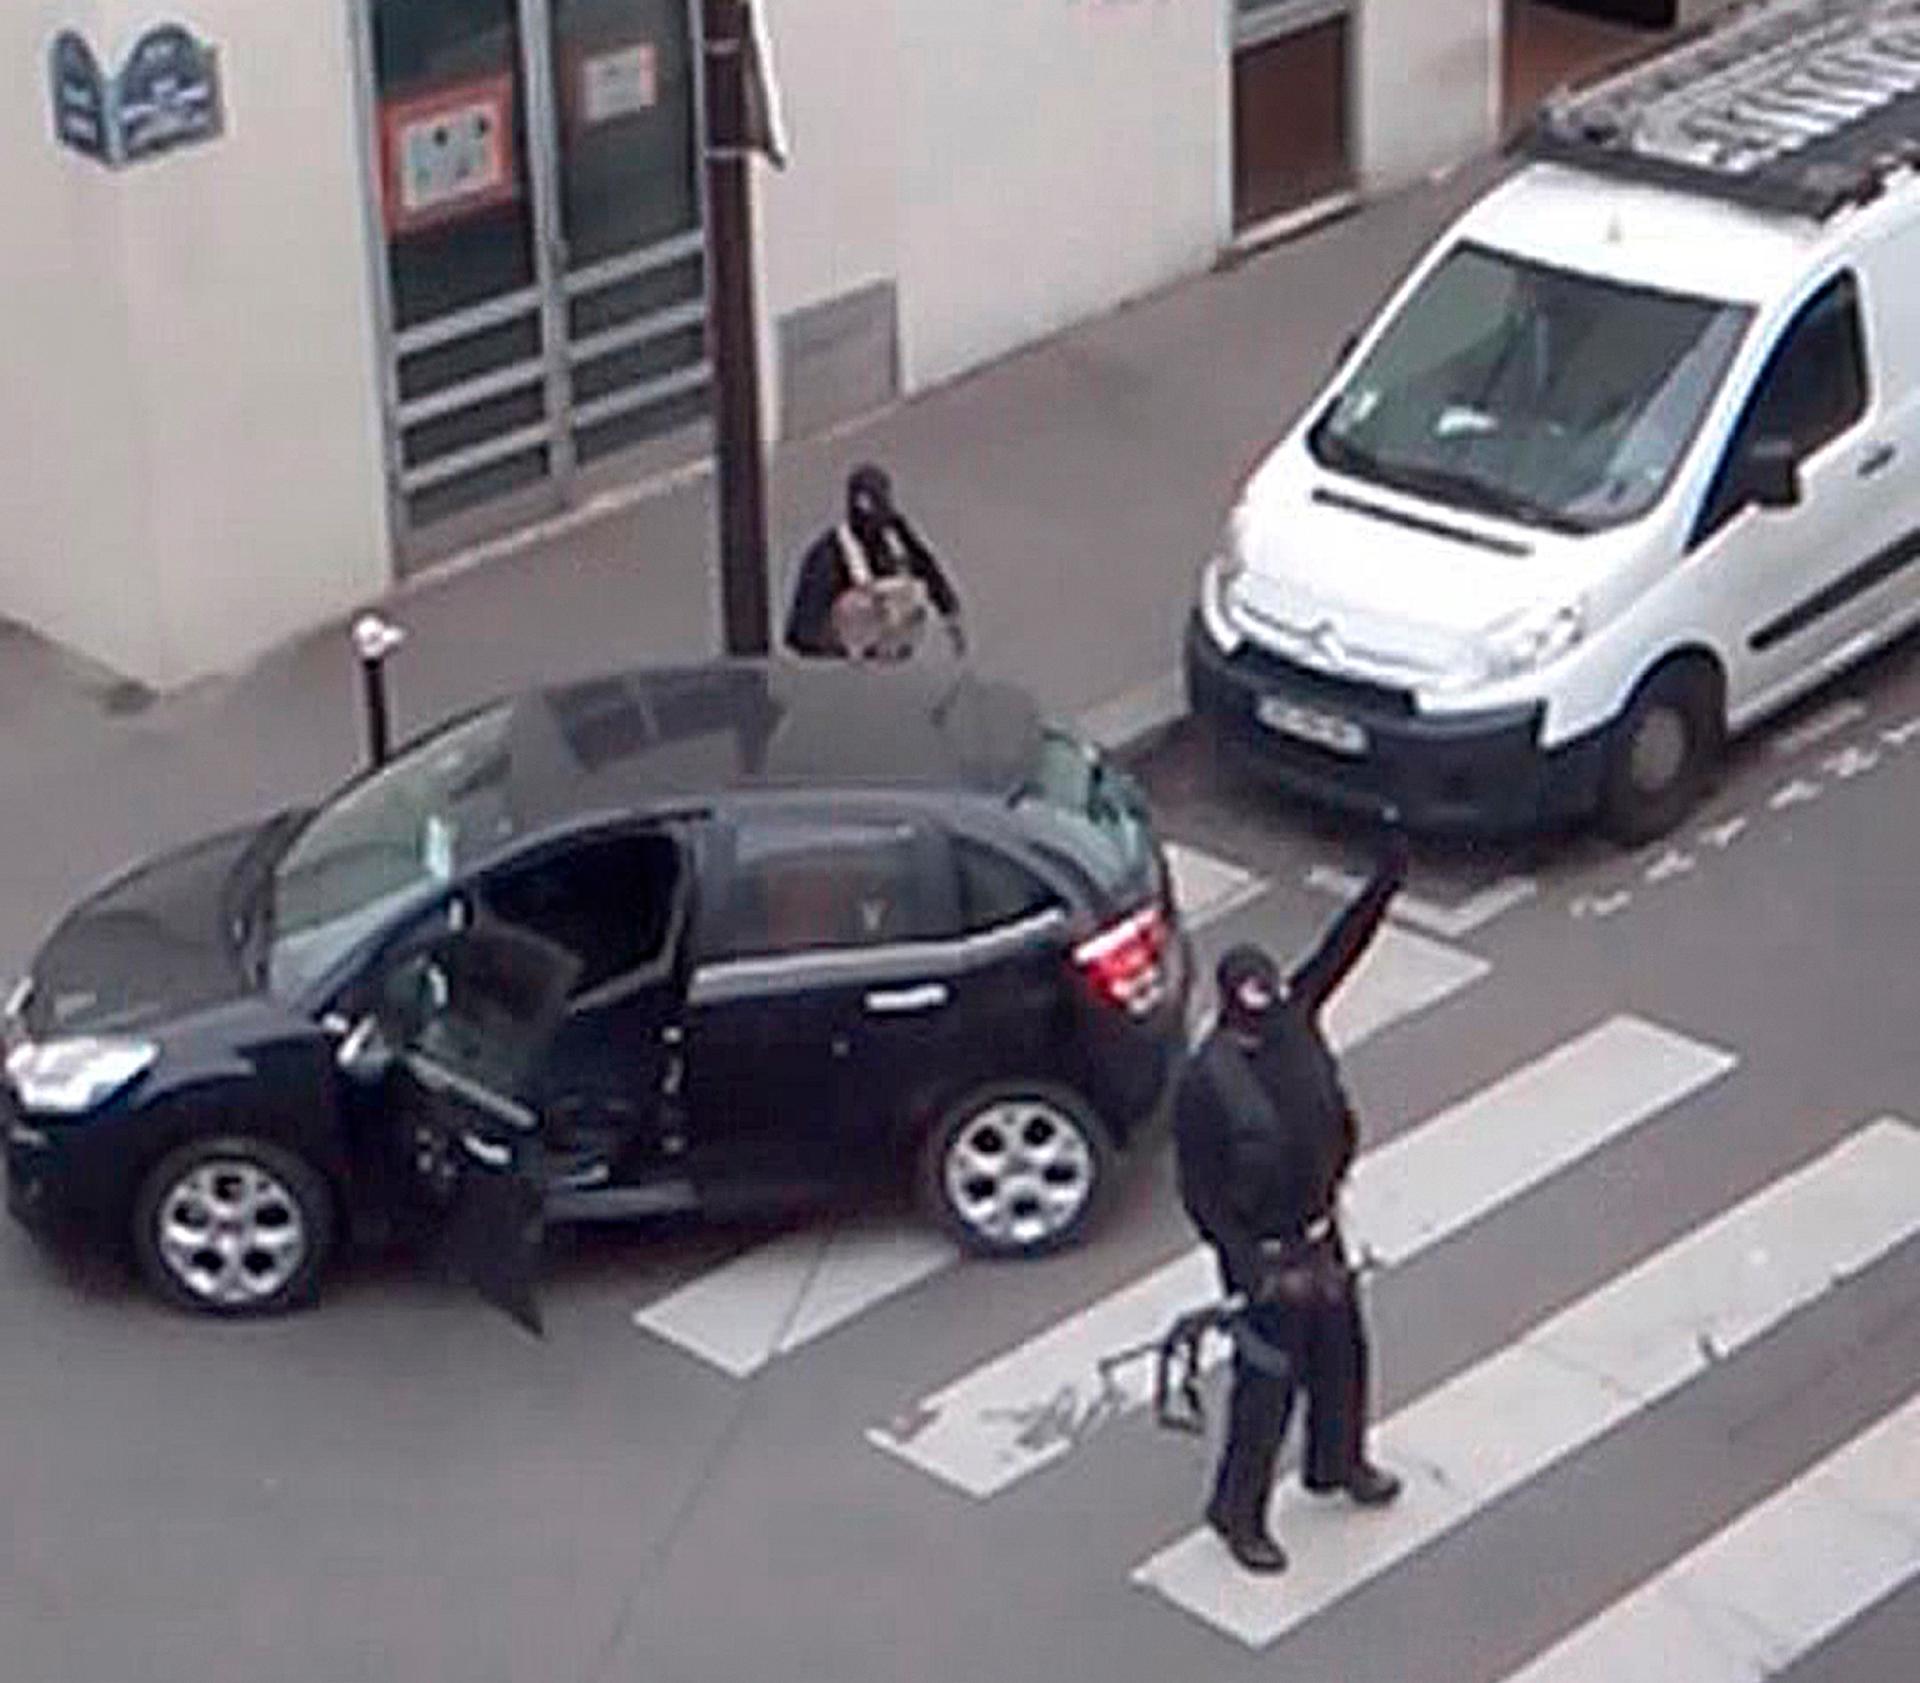 Said and Cherif Kouachi, the gunmen who killed twelve people during their attack on the offices of Charlie Hebdo, are seen in an image from an amateur video shot in Paris January 7, 2015. The Kouachi brothers were the children of Algerian immigrants to Fr